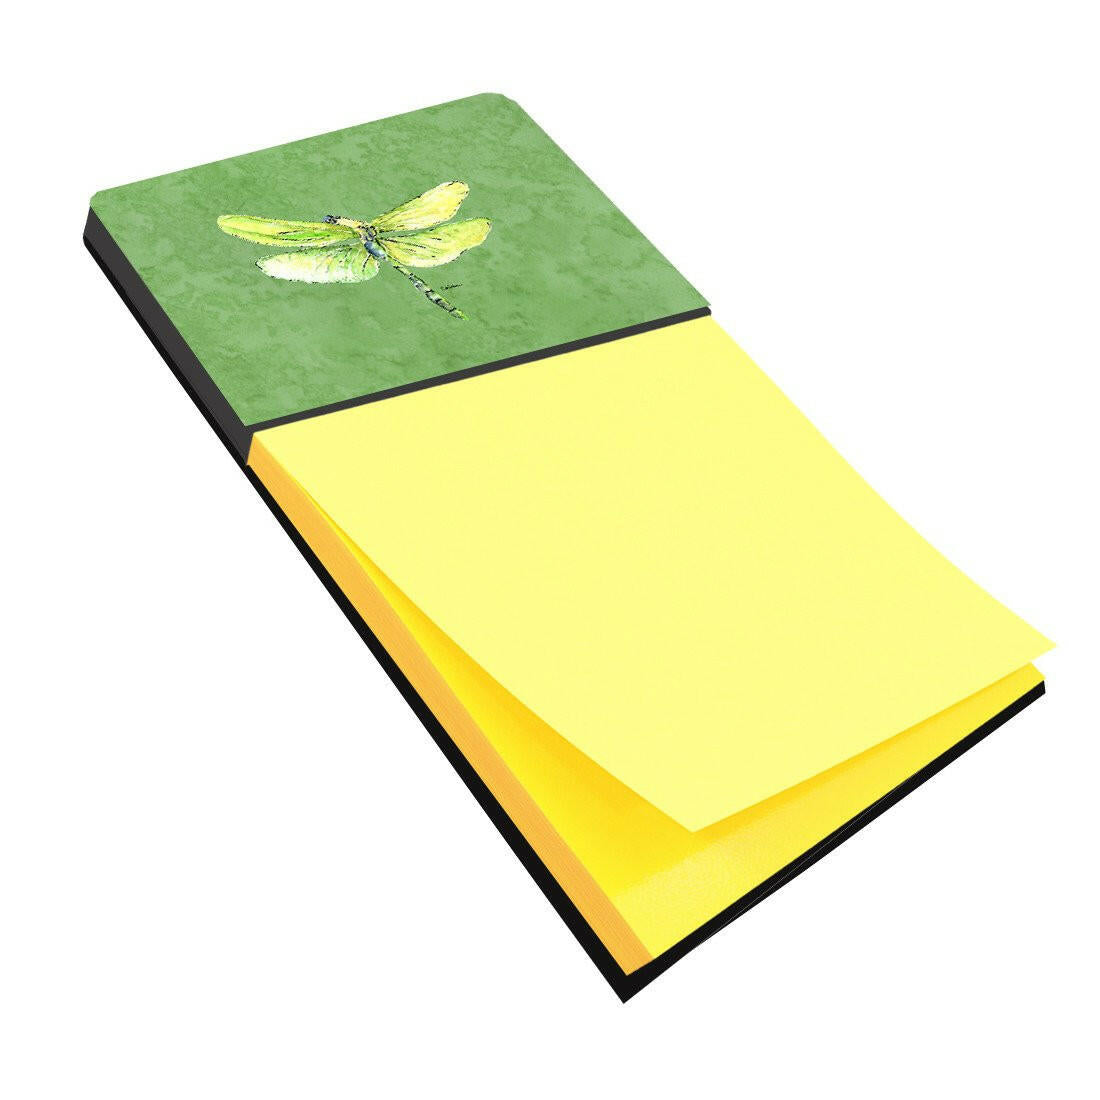 Dragonfly on Avacado Refiillable Sticky Note Holder or Postit Note Dispenser 8864SN by Caroline&#39;s Treasures